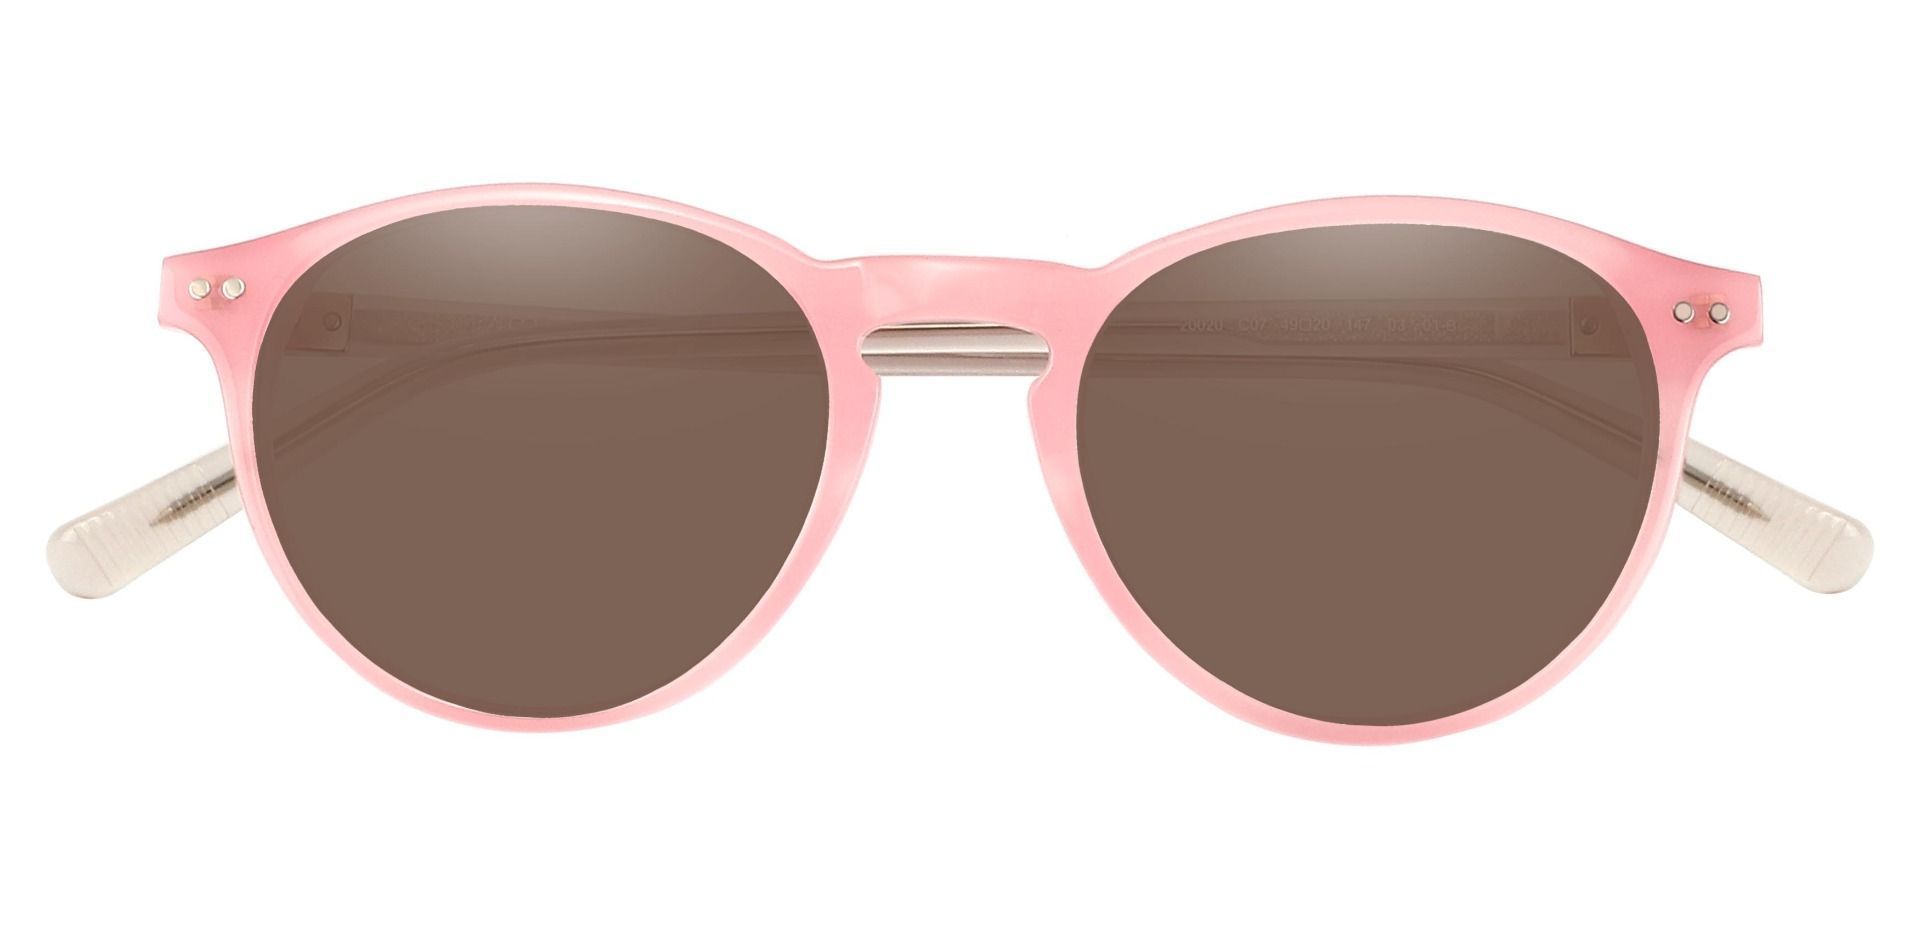 Monarch Oval Prescription Sunglasses - Pink Frame With Brown Lenses